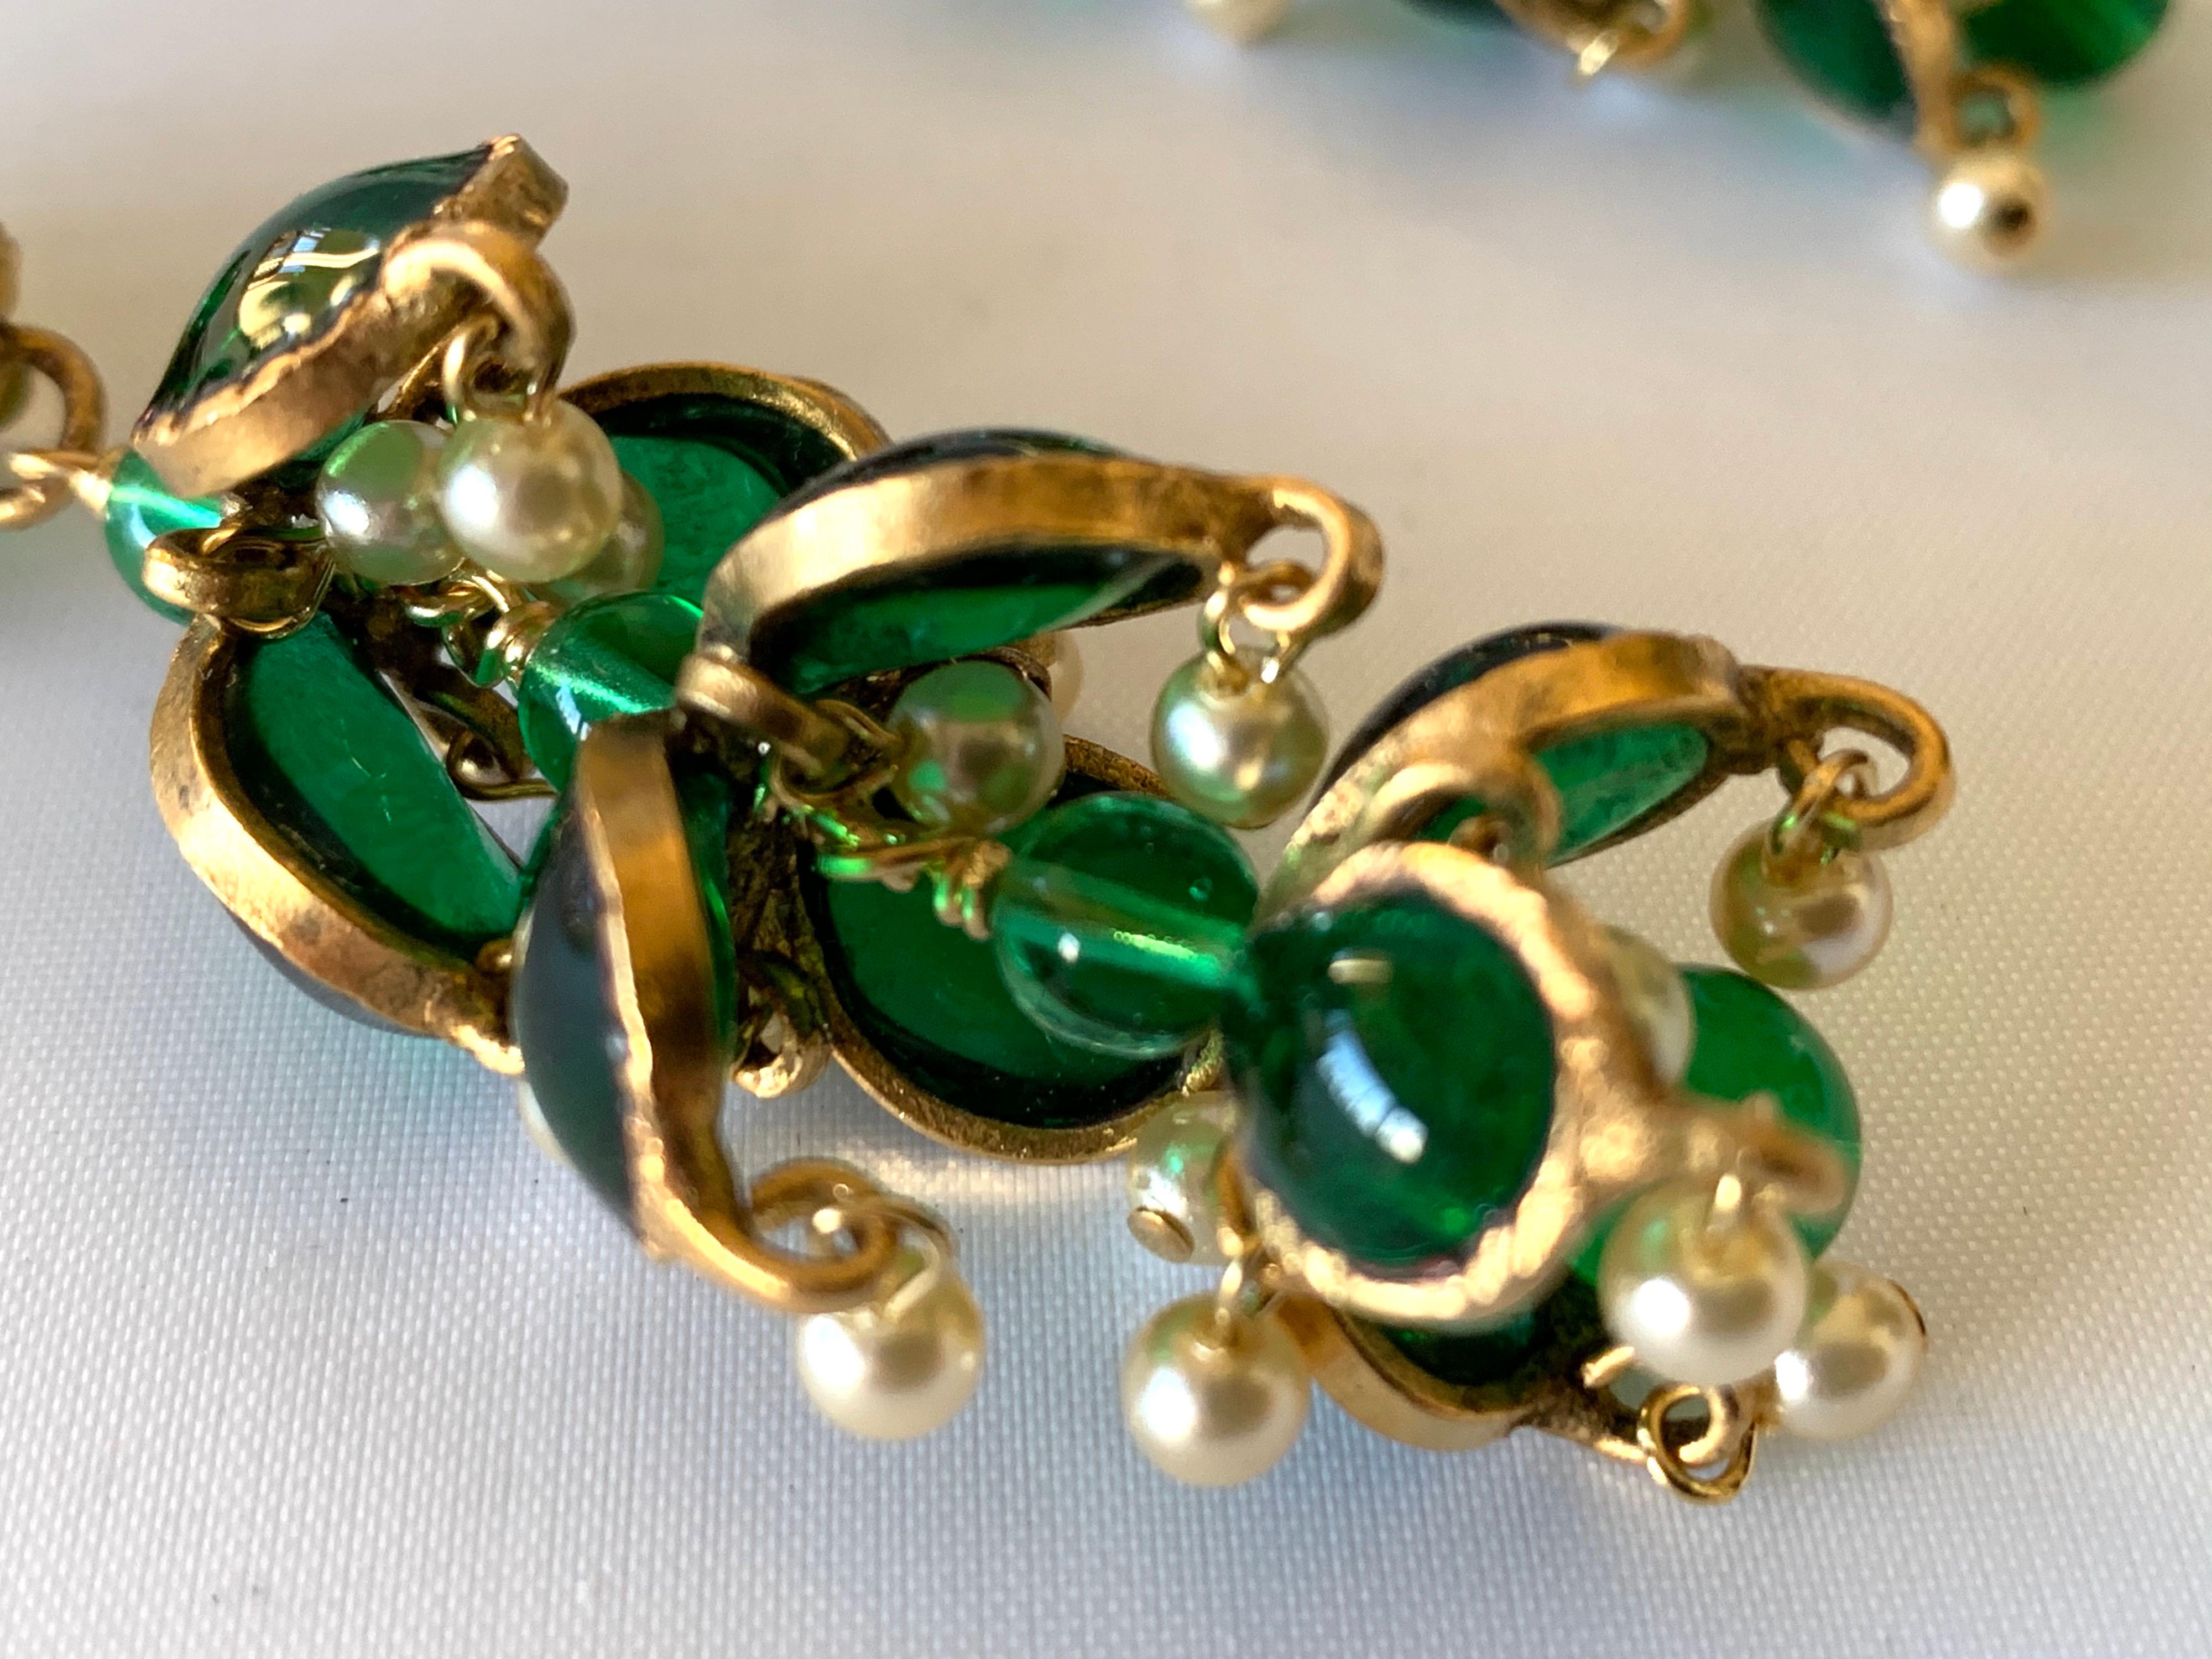 Vintage Chanel Emerald and Pearl Mughal Statement Earrings  1